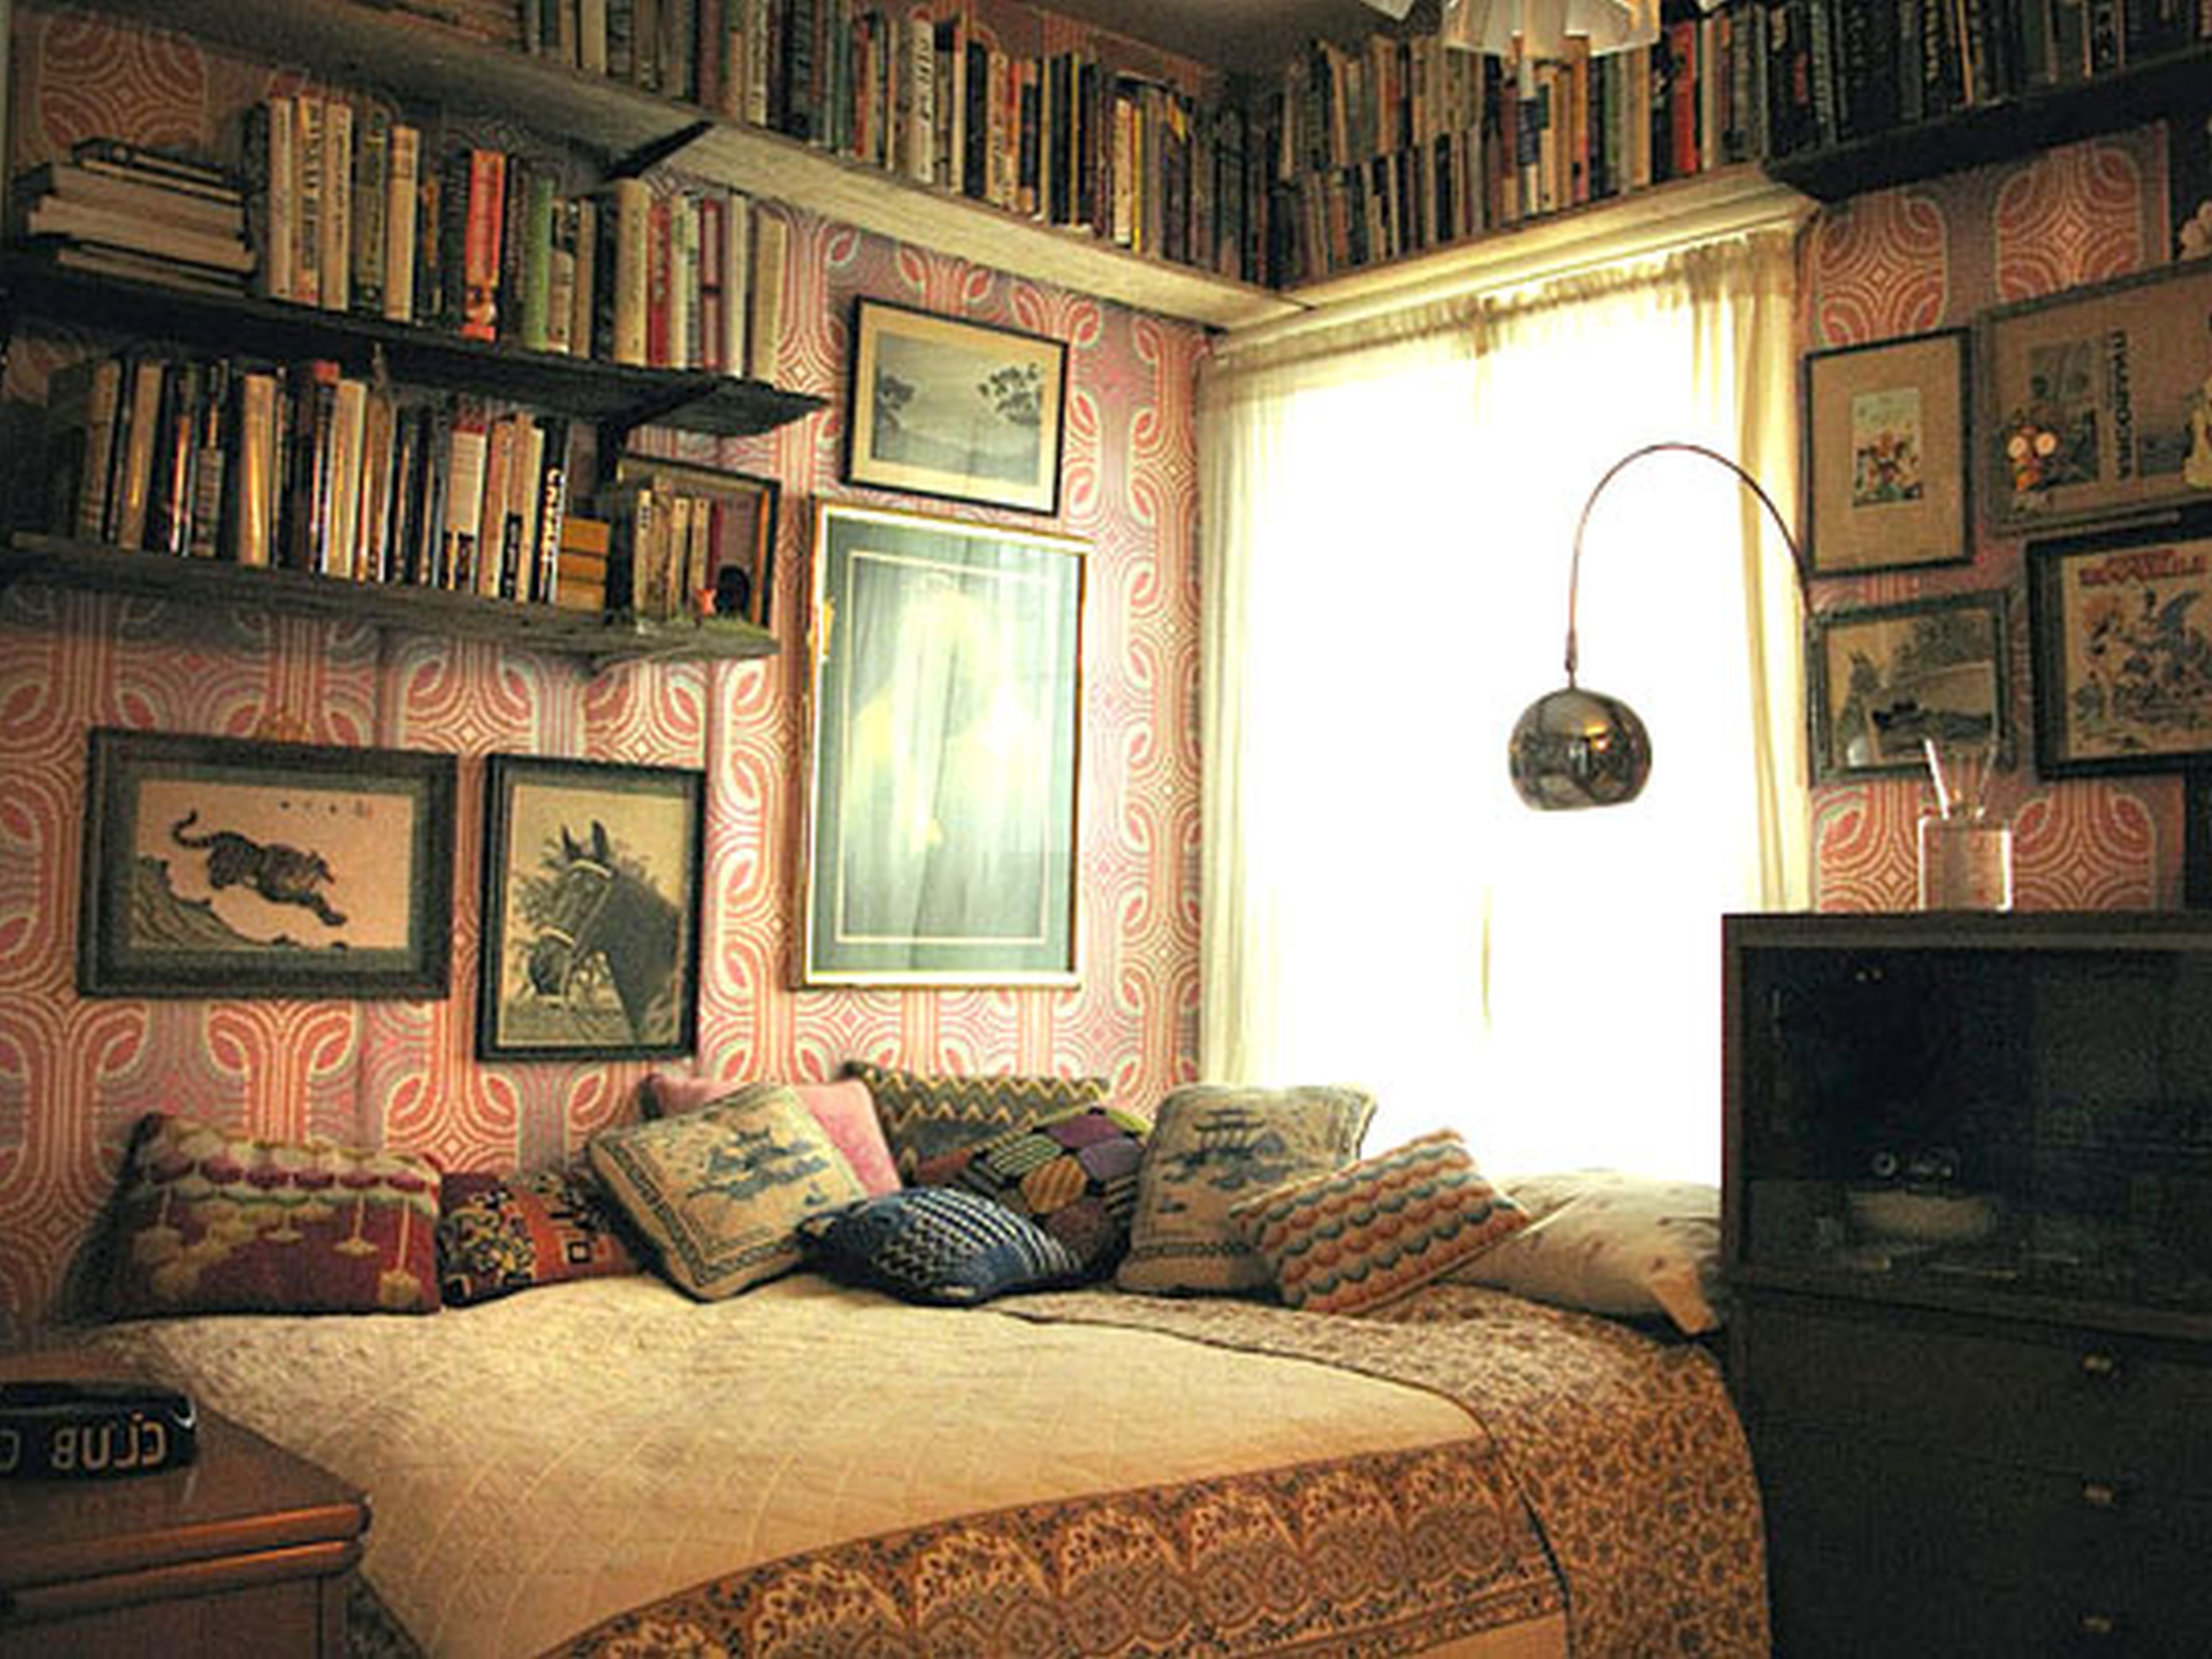 After Seeing These Amazing Rooms, You Wouldn't Want To ...